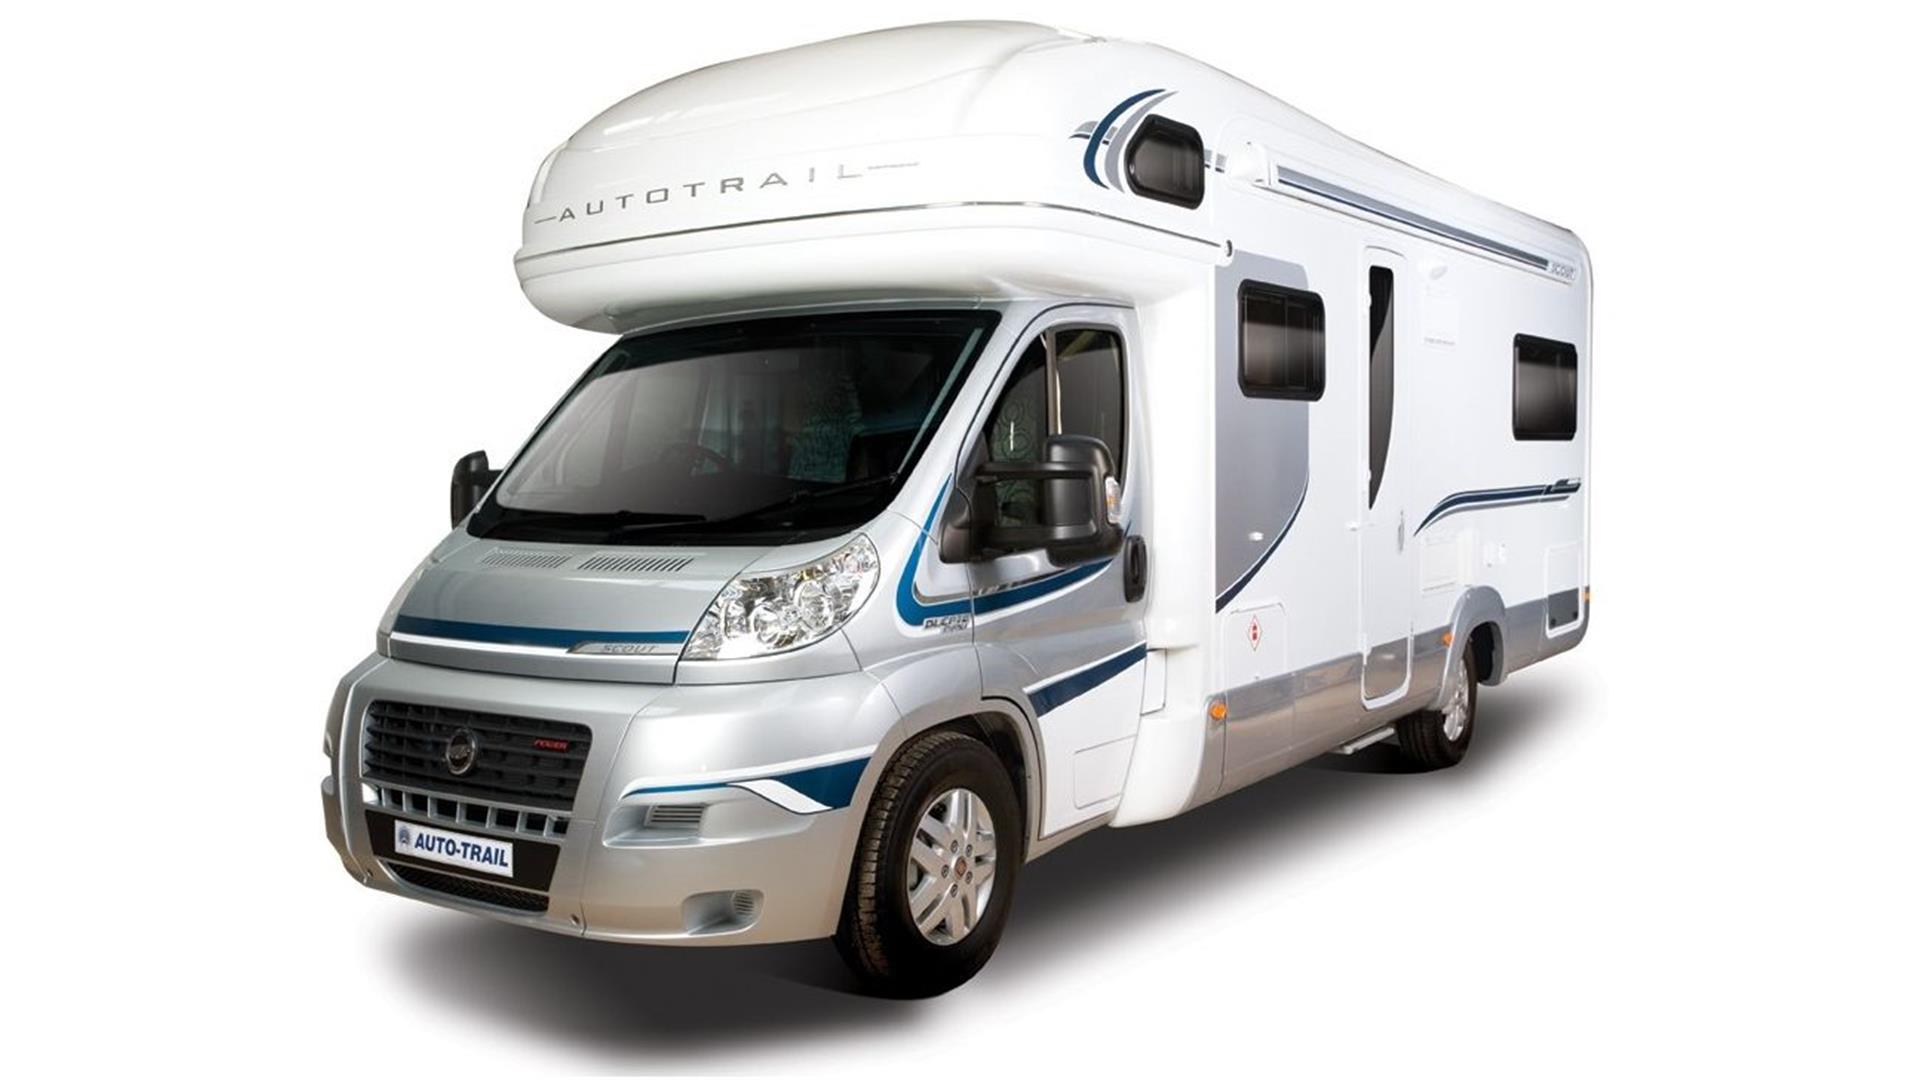 Image is of a silver and white motorhome